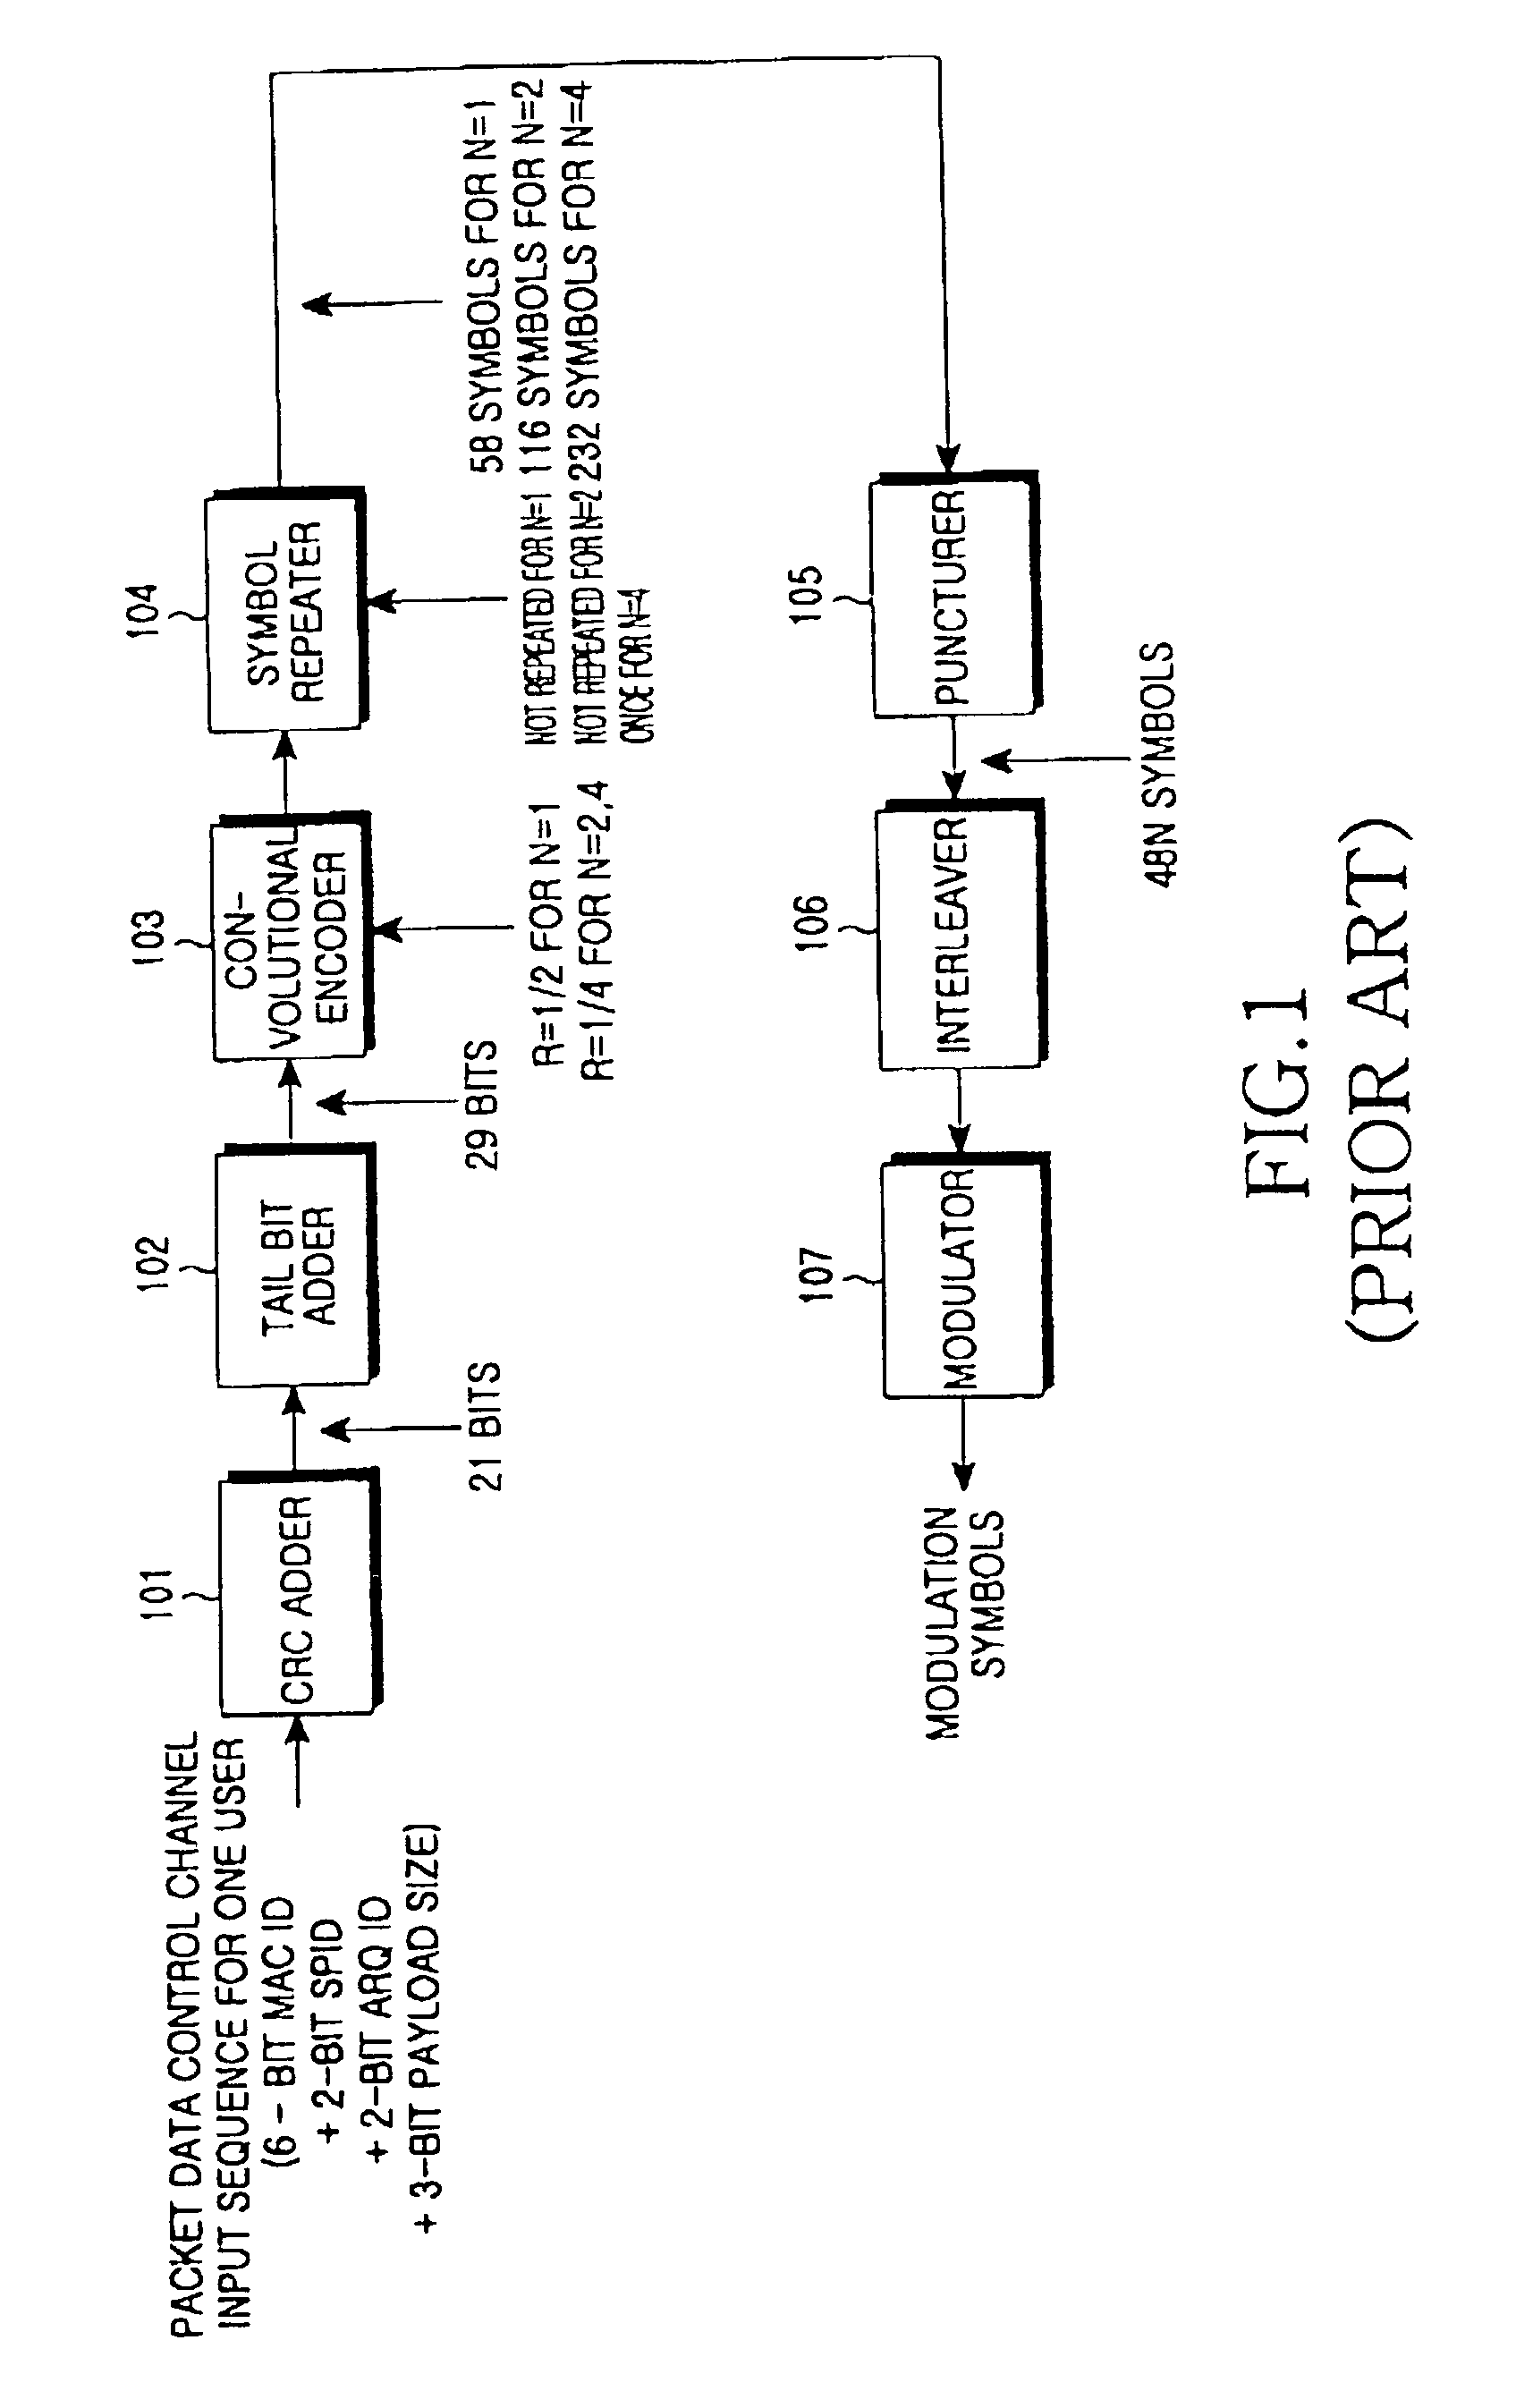 Apparatus for transmitting/receiving data on packet data control channel in a communication system